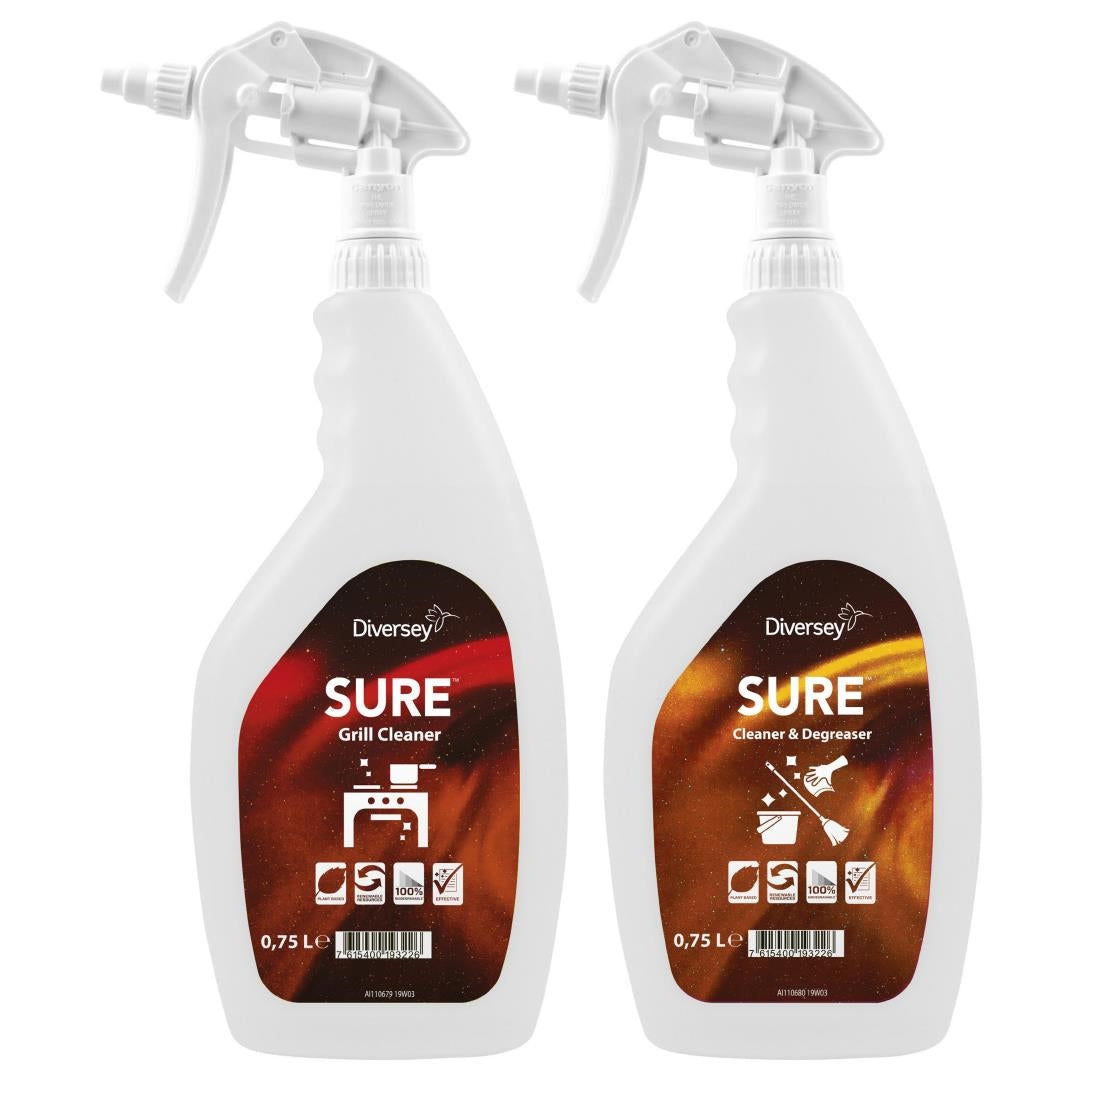 FA403 SURE Cleaner and Degreaser / Grill Cleaner Refill Bottles 750ml (6 Pack)